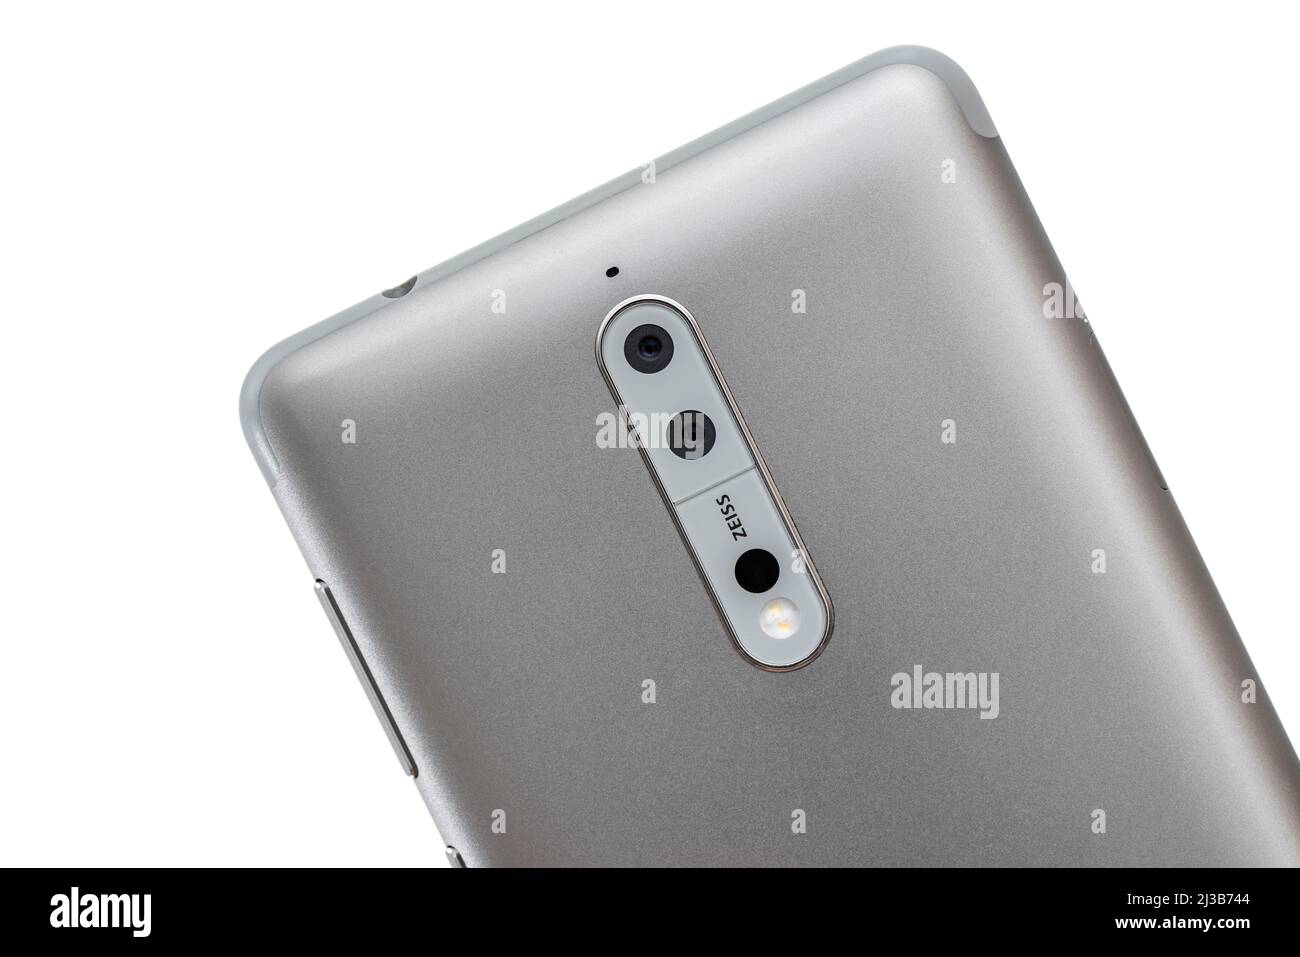 ISTANBUL, TURKEY - JUNE 10, 2019: Nokia 8 rear side. Nokia 8 android smartphone by HMD global with a notch display. Stock Photo